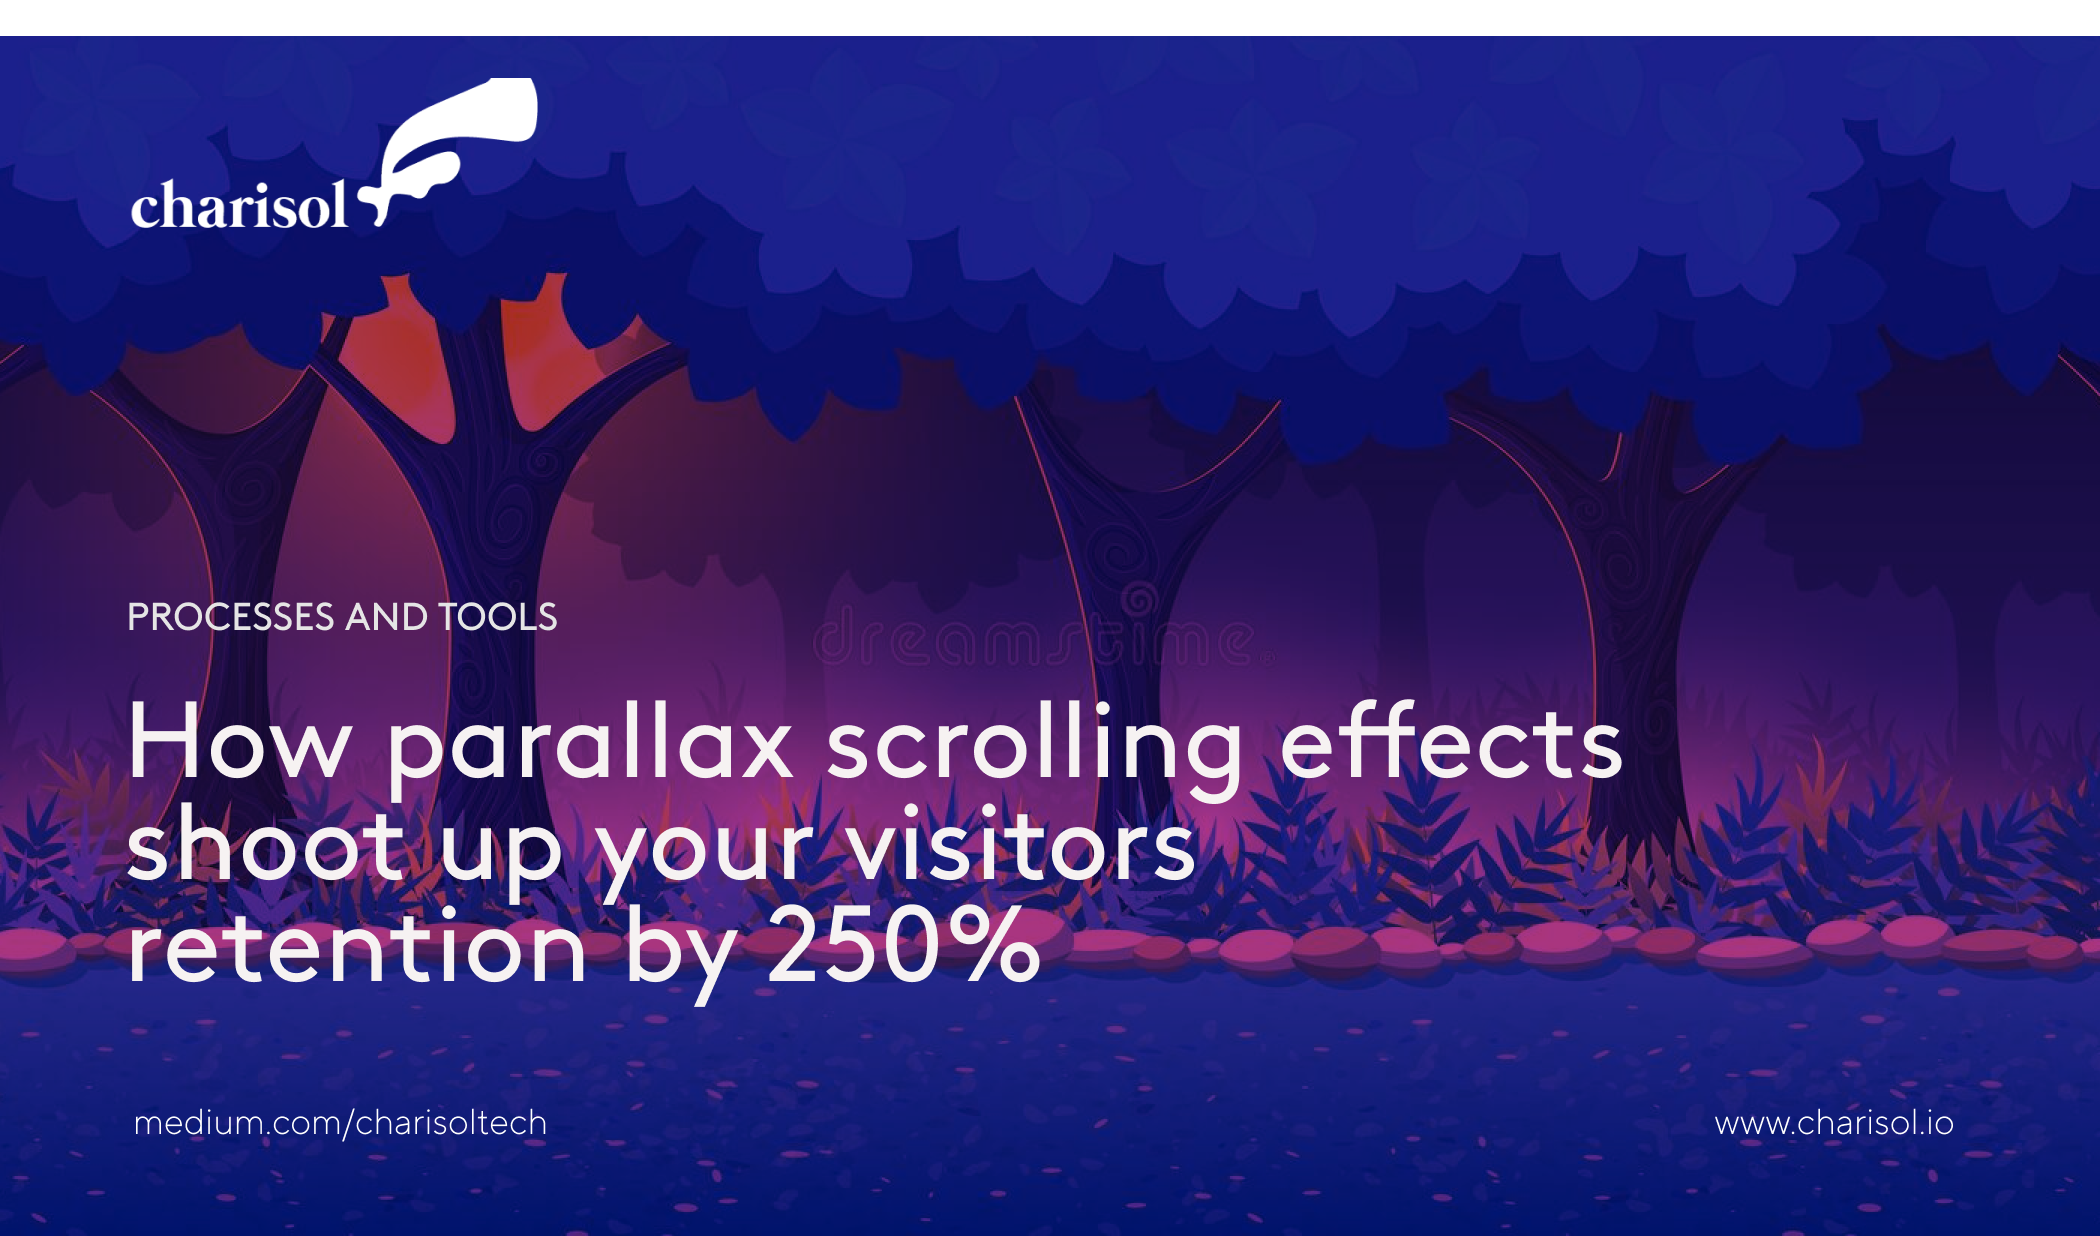 How parallax scrolling effects shoot up your visitors